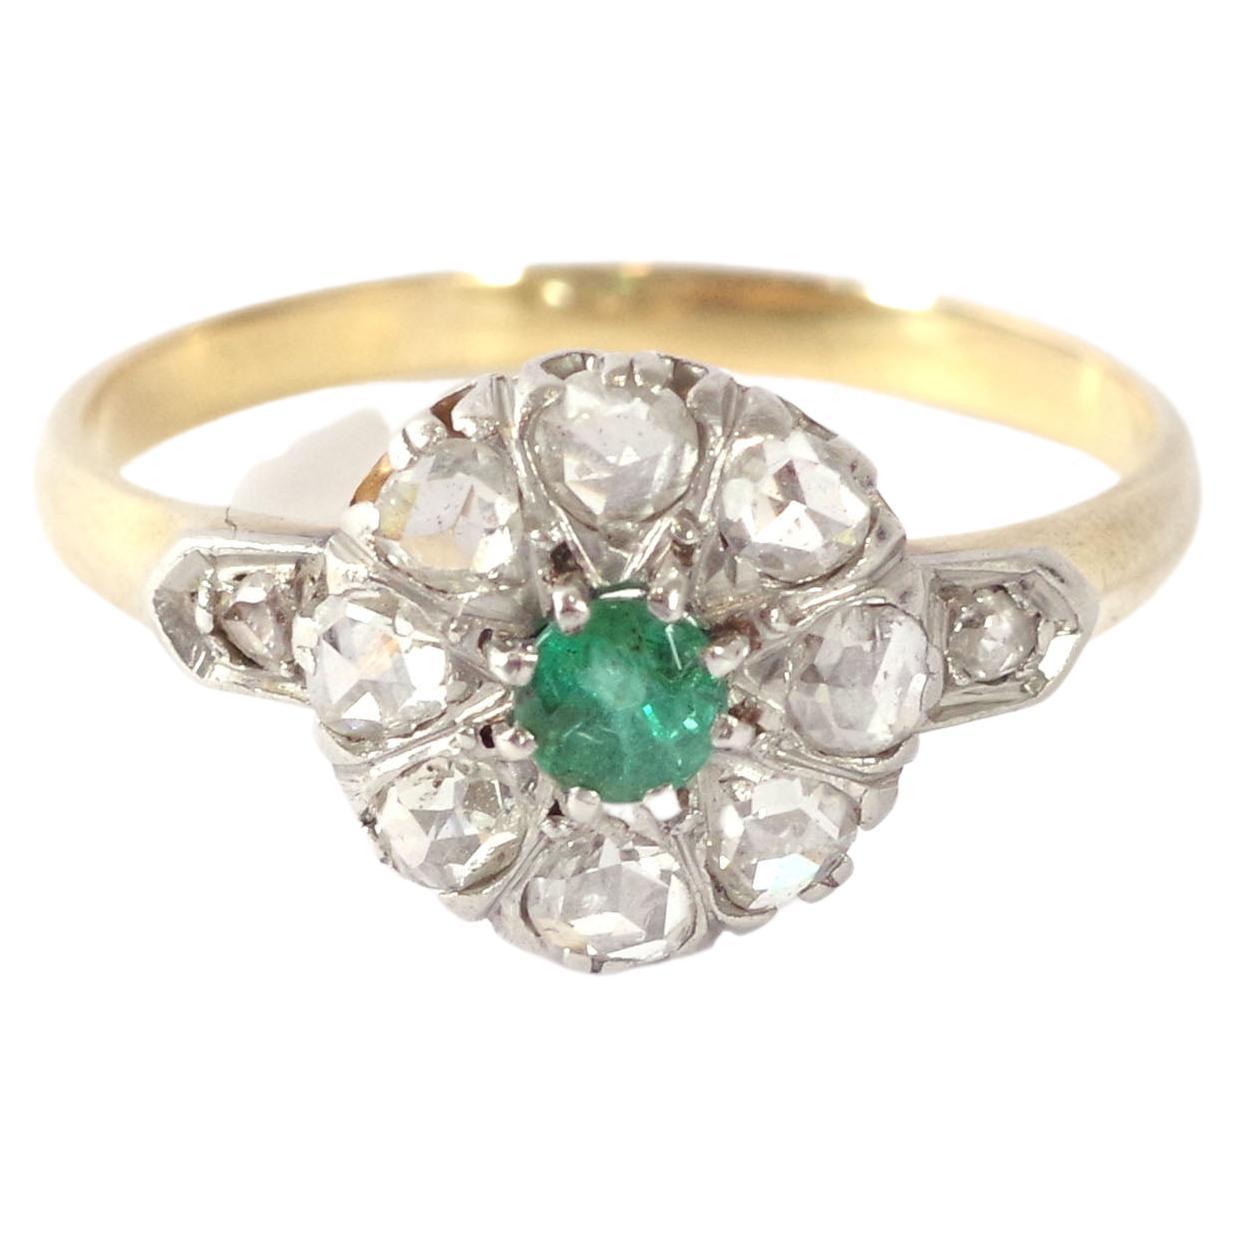 French cluster emerald ring in 18 karat pink gold and platinum